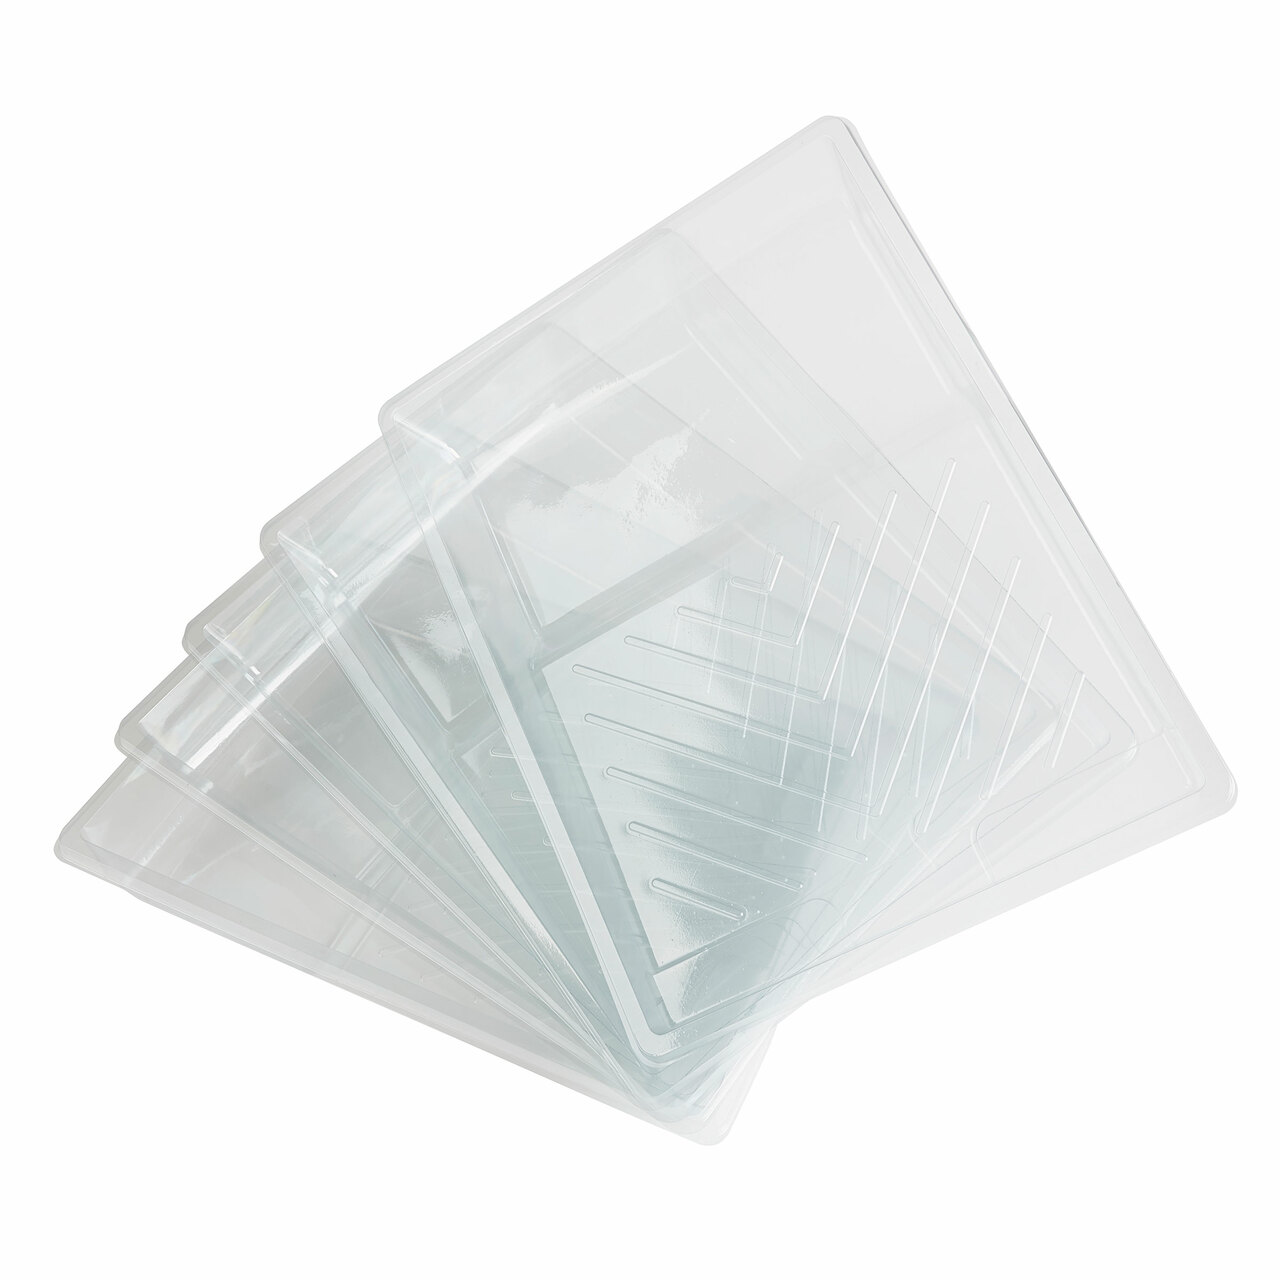 LG Harris - Seriously Good - 9" Paint Tray Liners (Pack of 5)